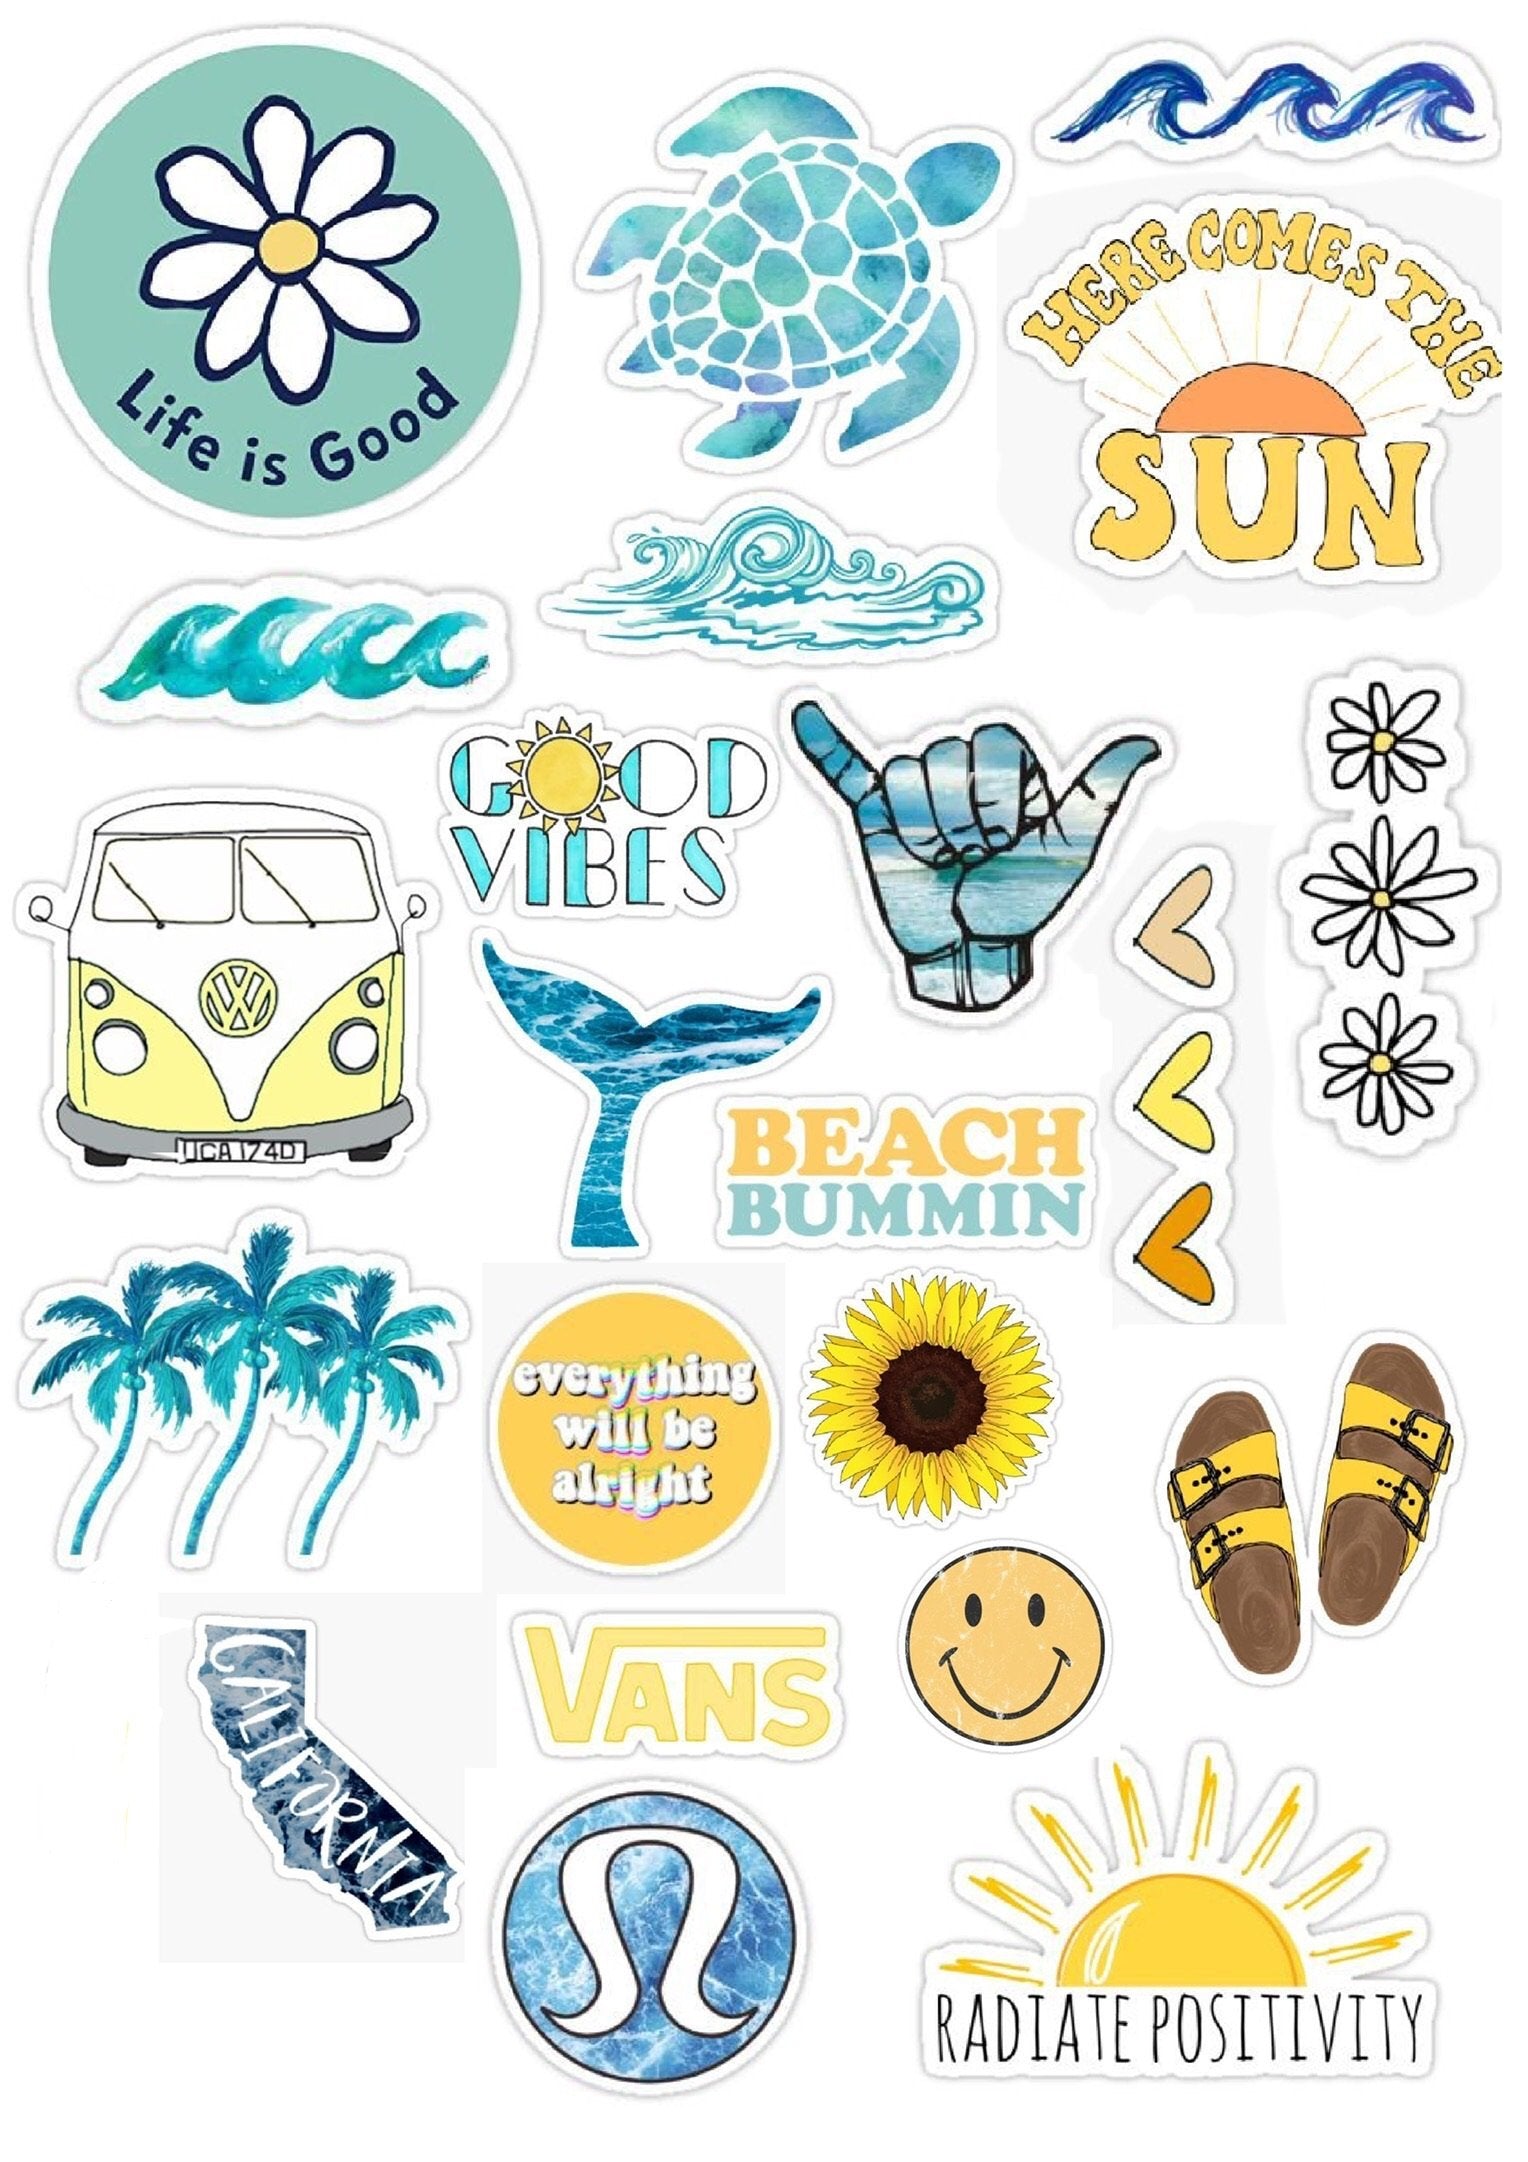 Stickers Pack | Memes | Funny Stickers | Aesthetic Sticker | Cute Stickers  | Cute Sticker Pack | Poster